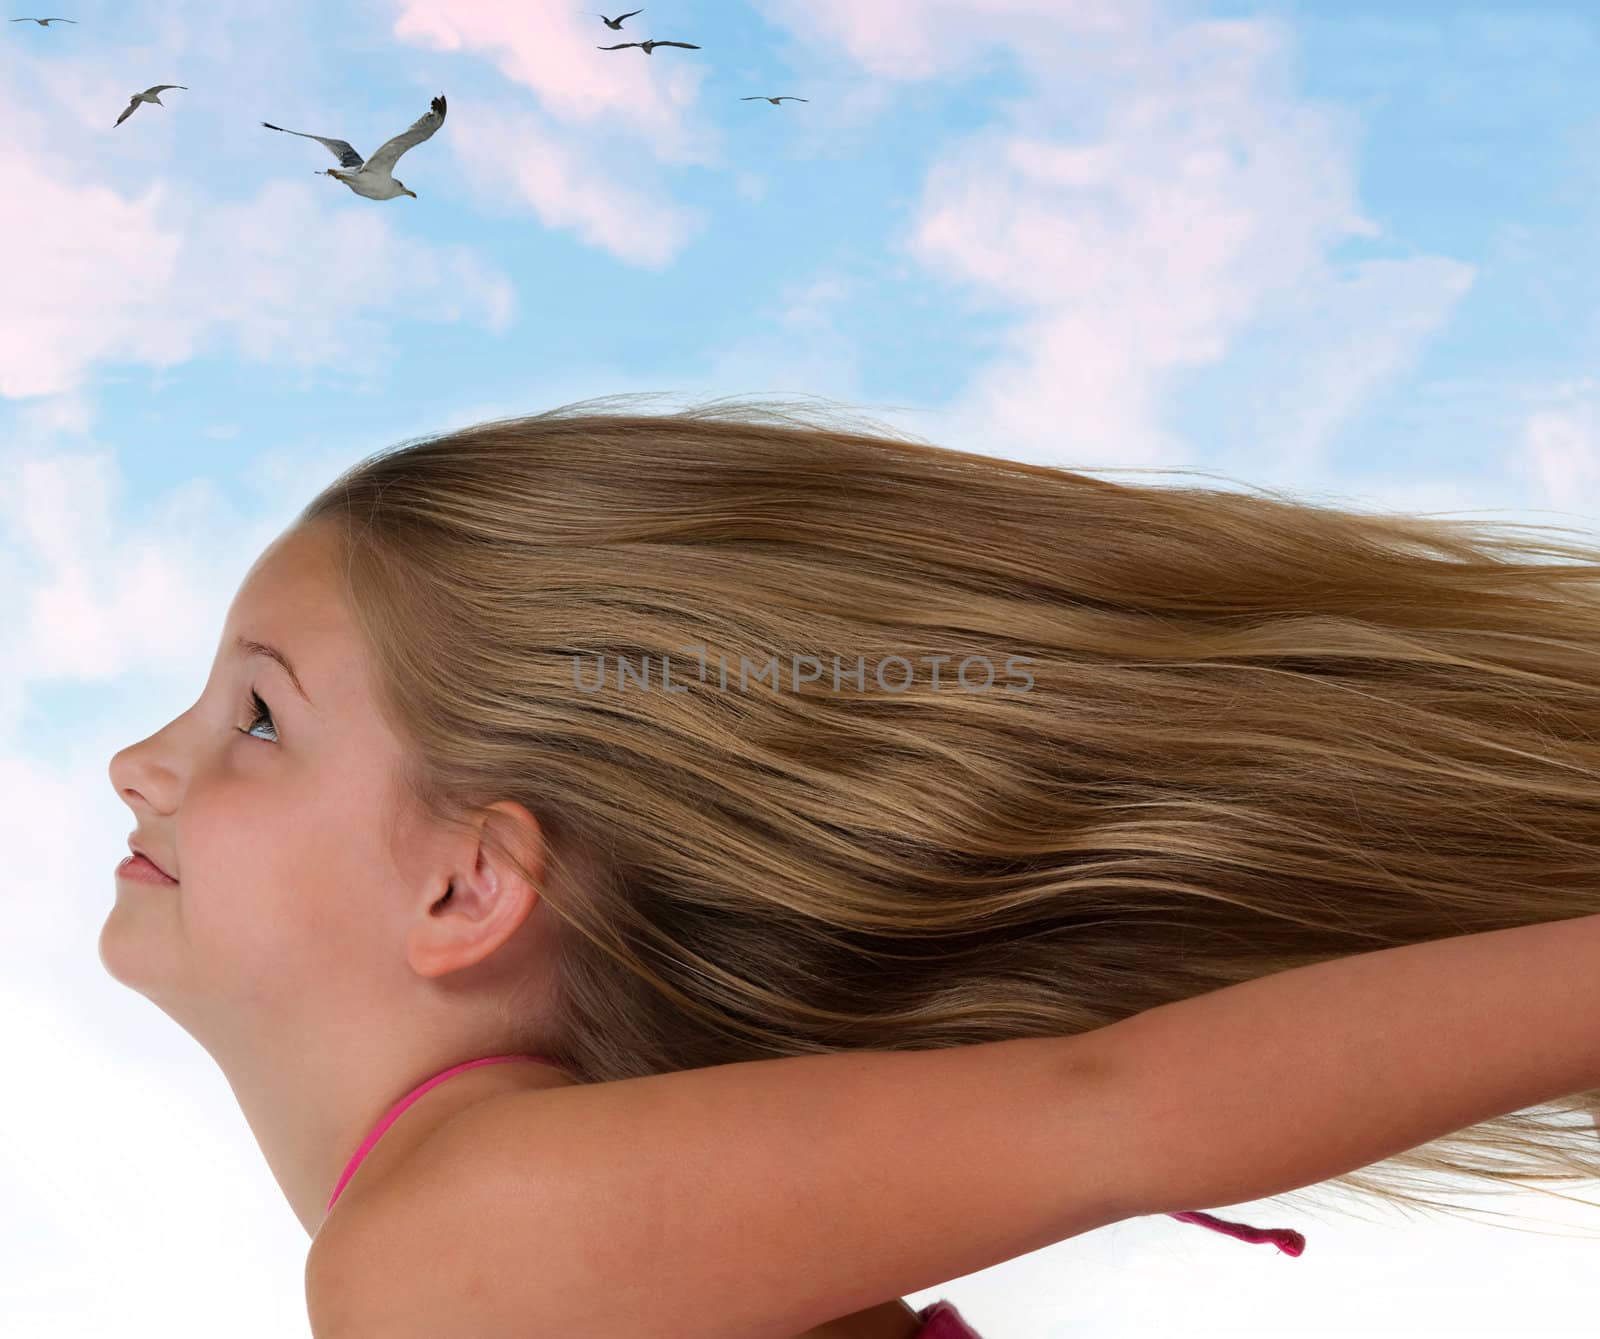 Girl flying through the clouds